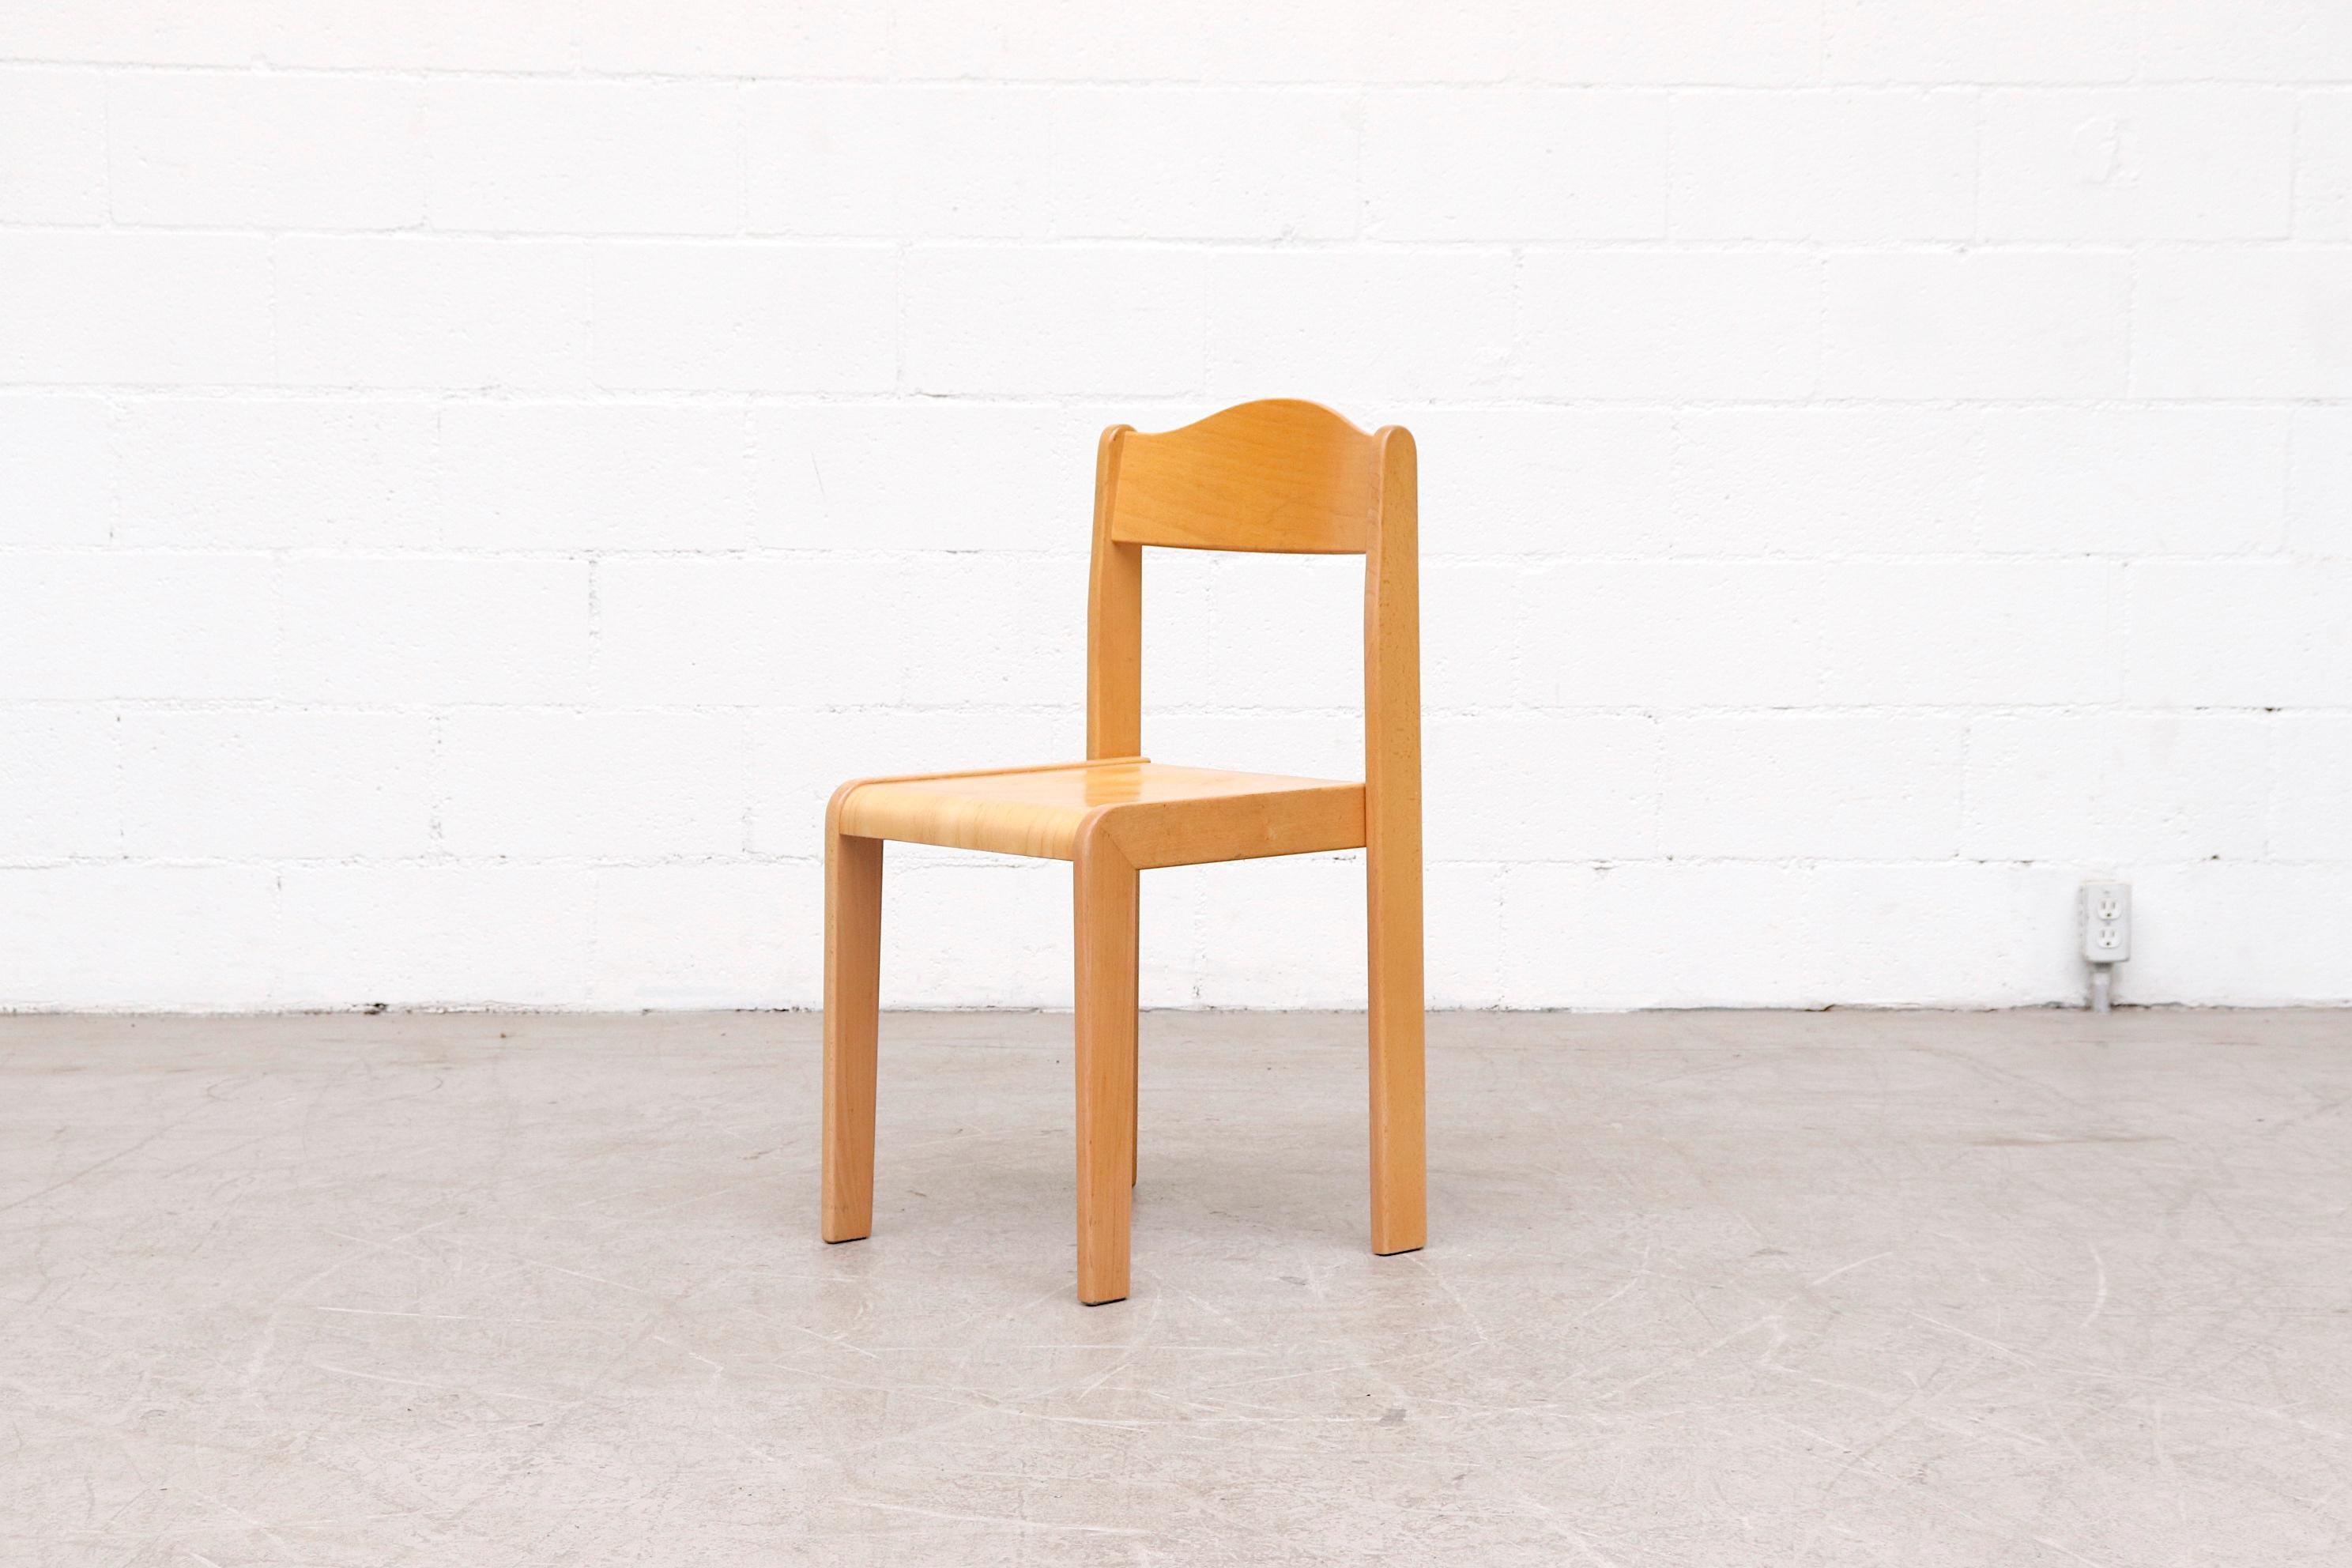 Sven Markelius style birch stacking chairs with flat seat backs. In original condition with visible wear and use. Lead time from time of order is 10 days.